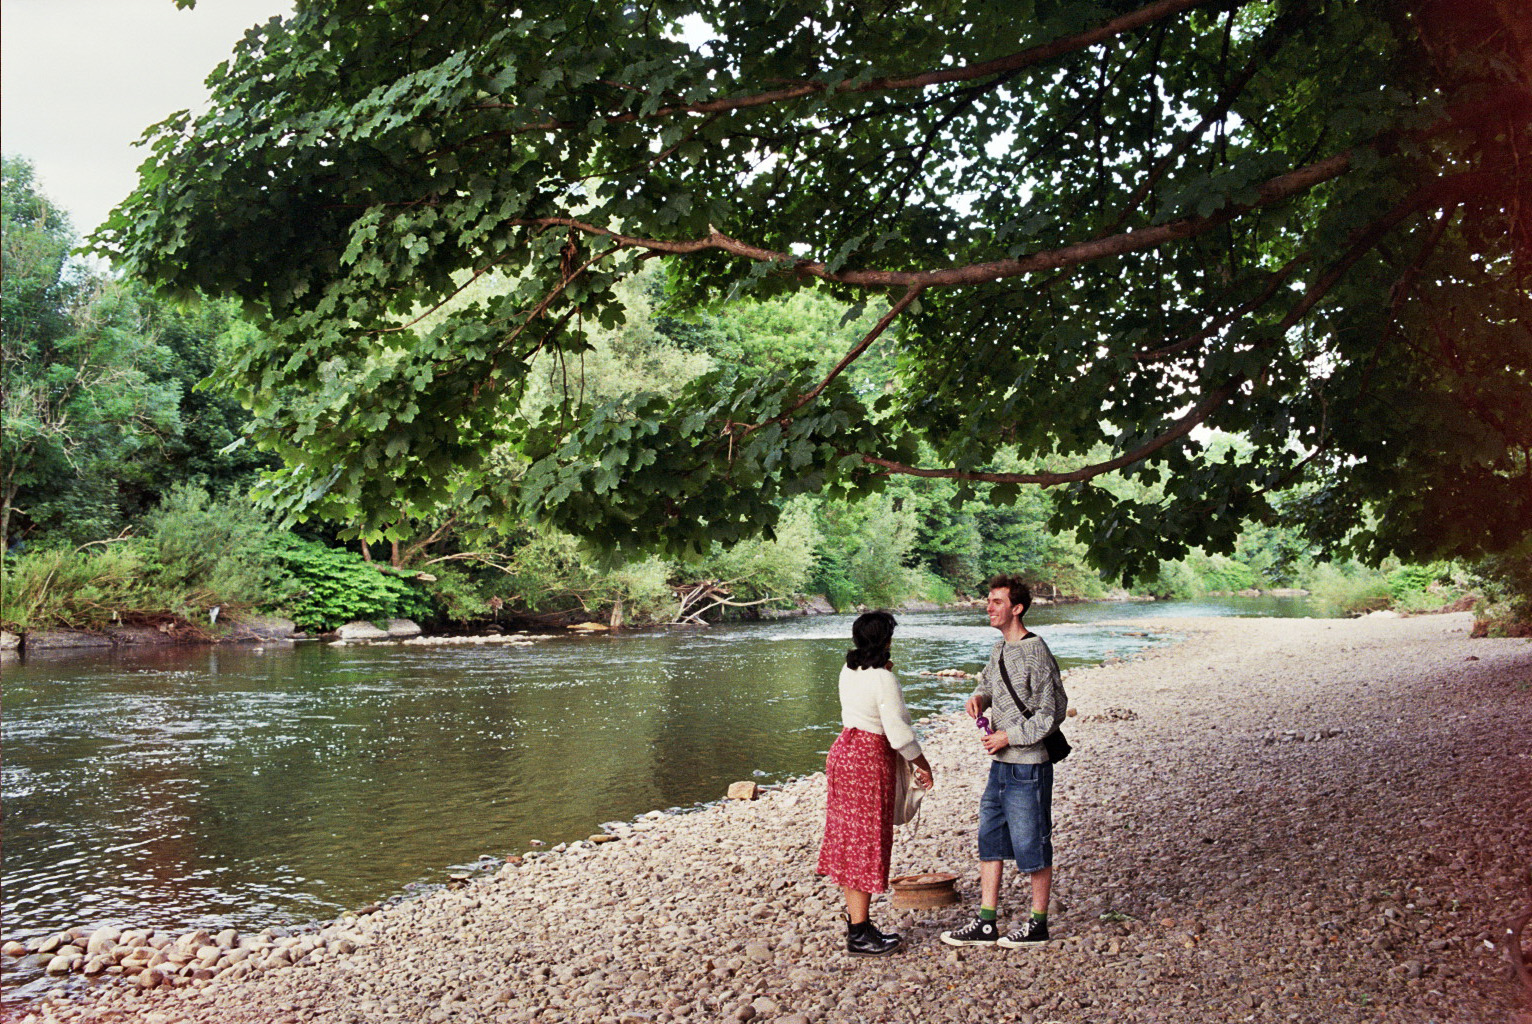 Two people by a river